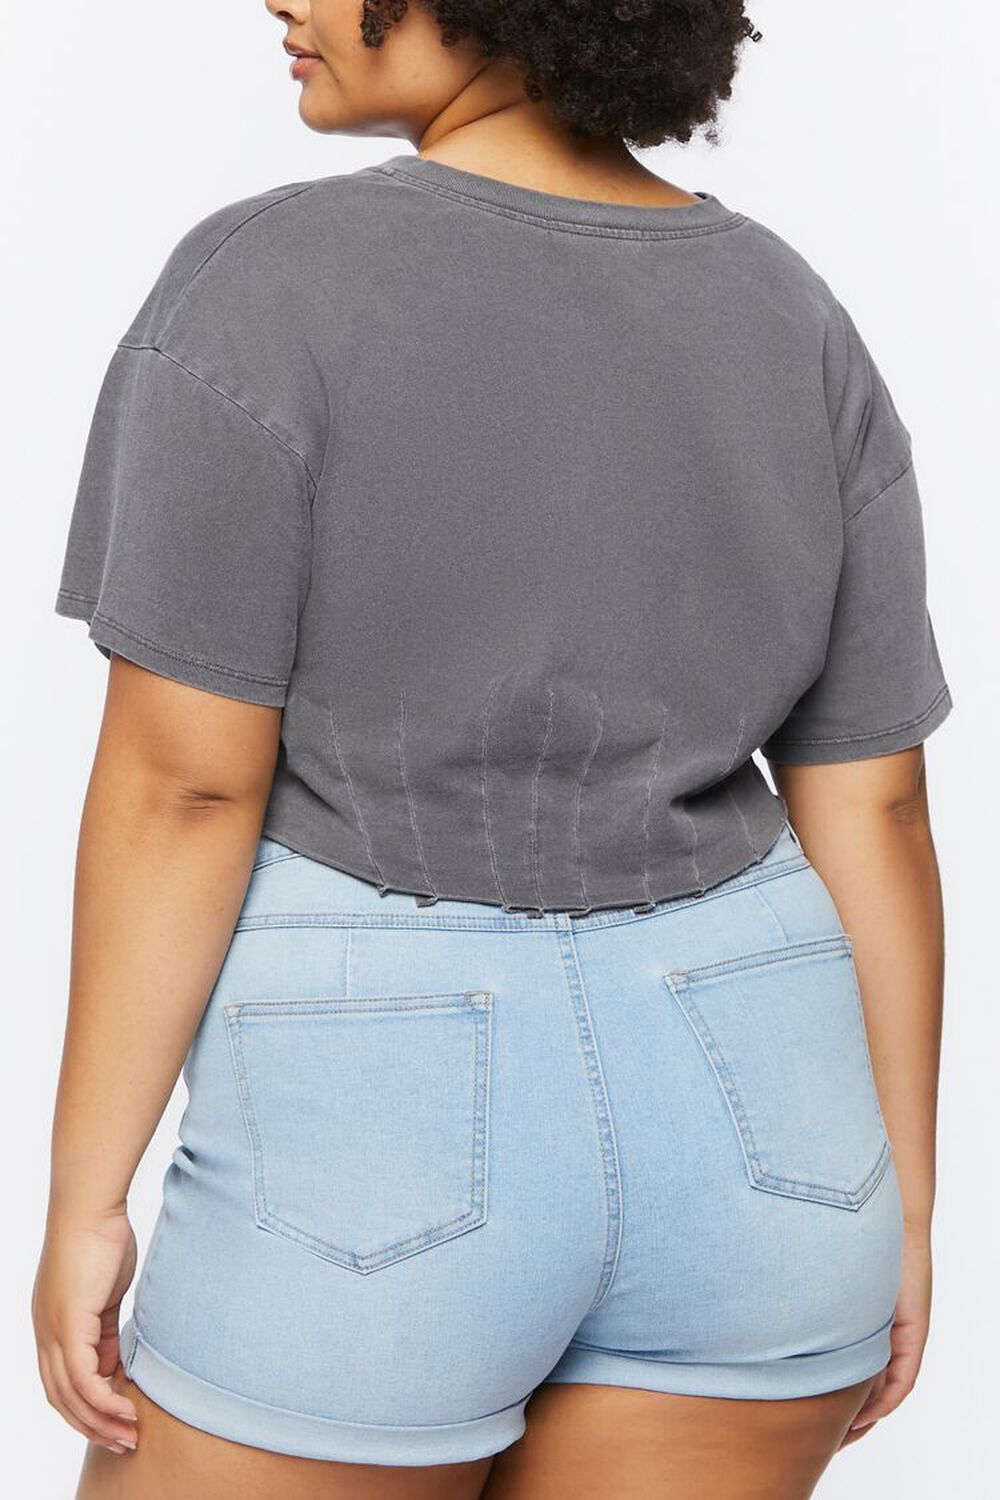 PEWTER Plus Size Raw-Cut Cropped Tee, image 3